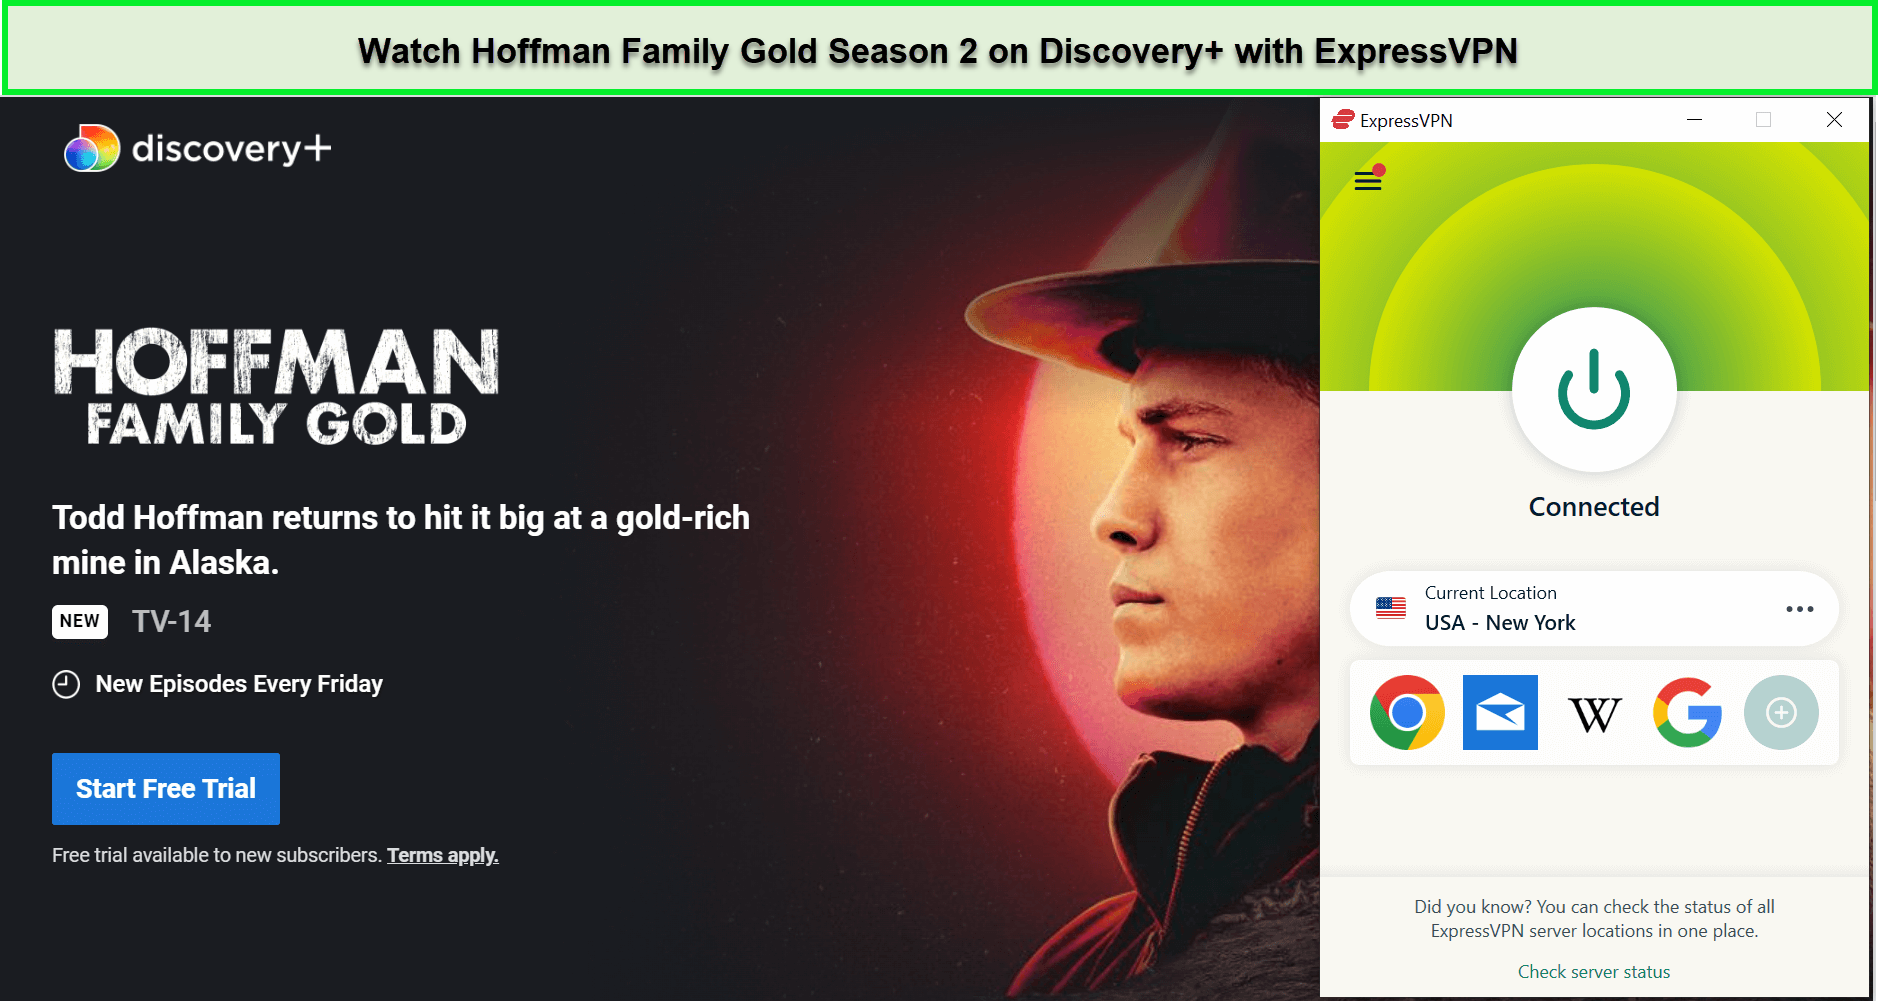 Watch-Hoffman-Family-Gold-Season-2-in-in-on-Discovery-with-ExpressVPN.